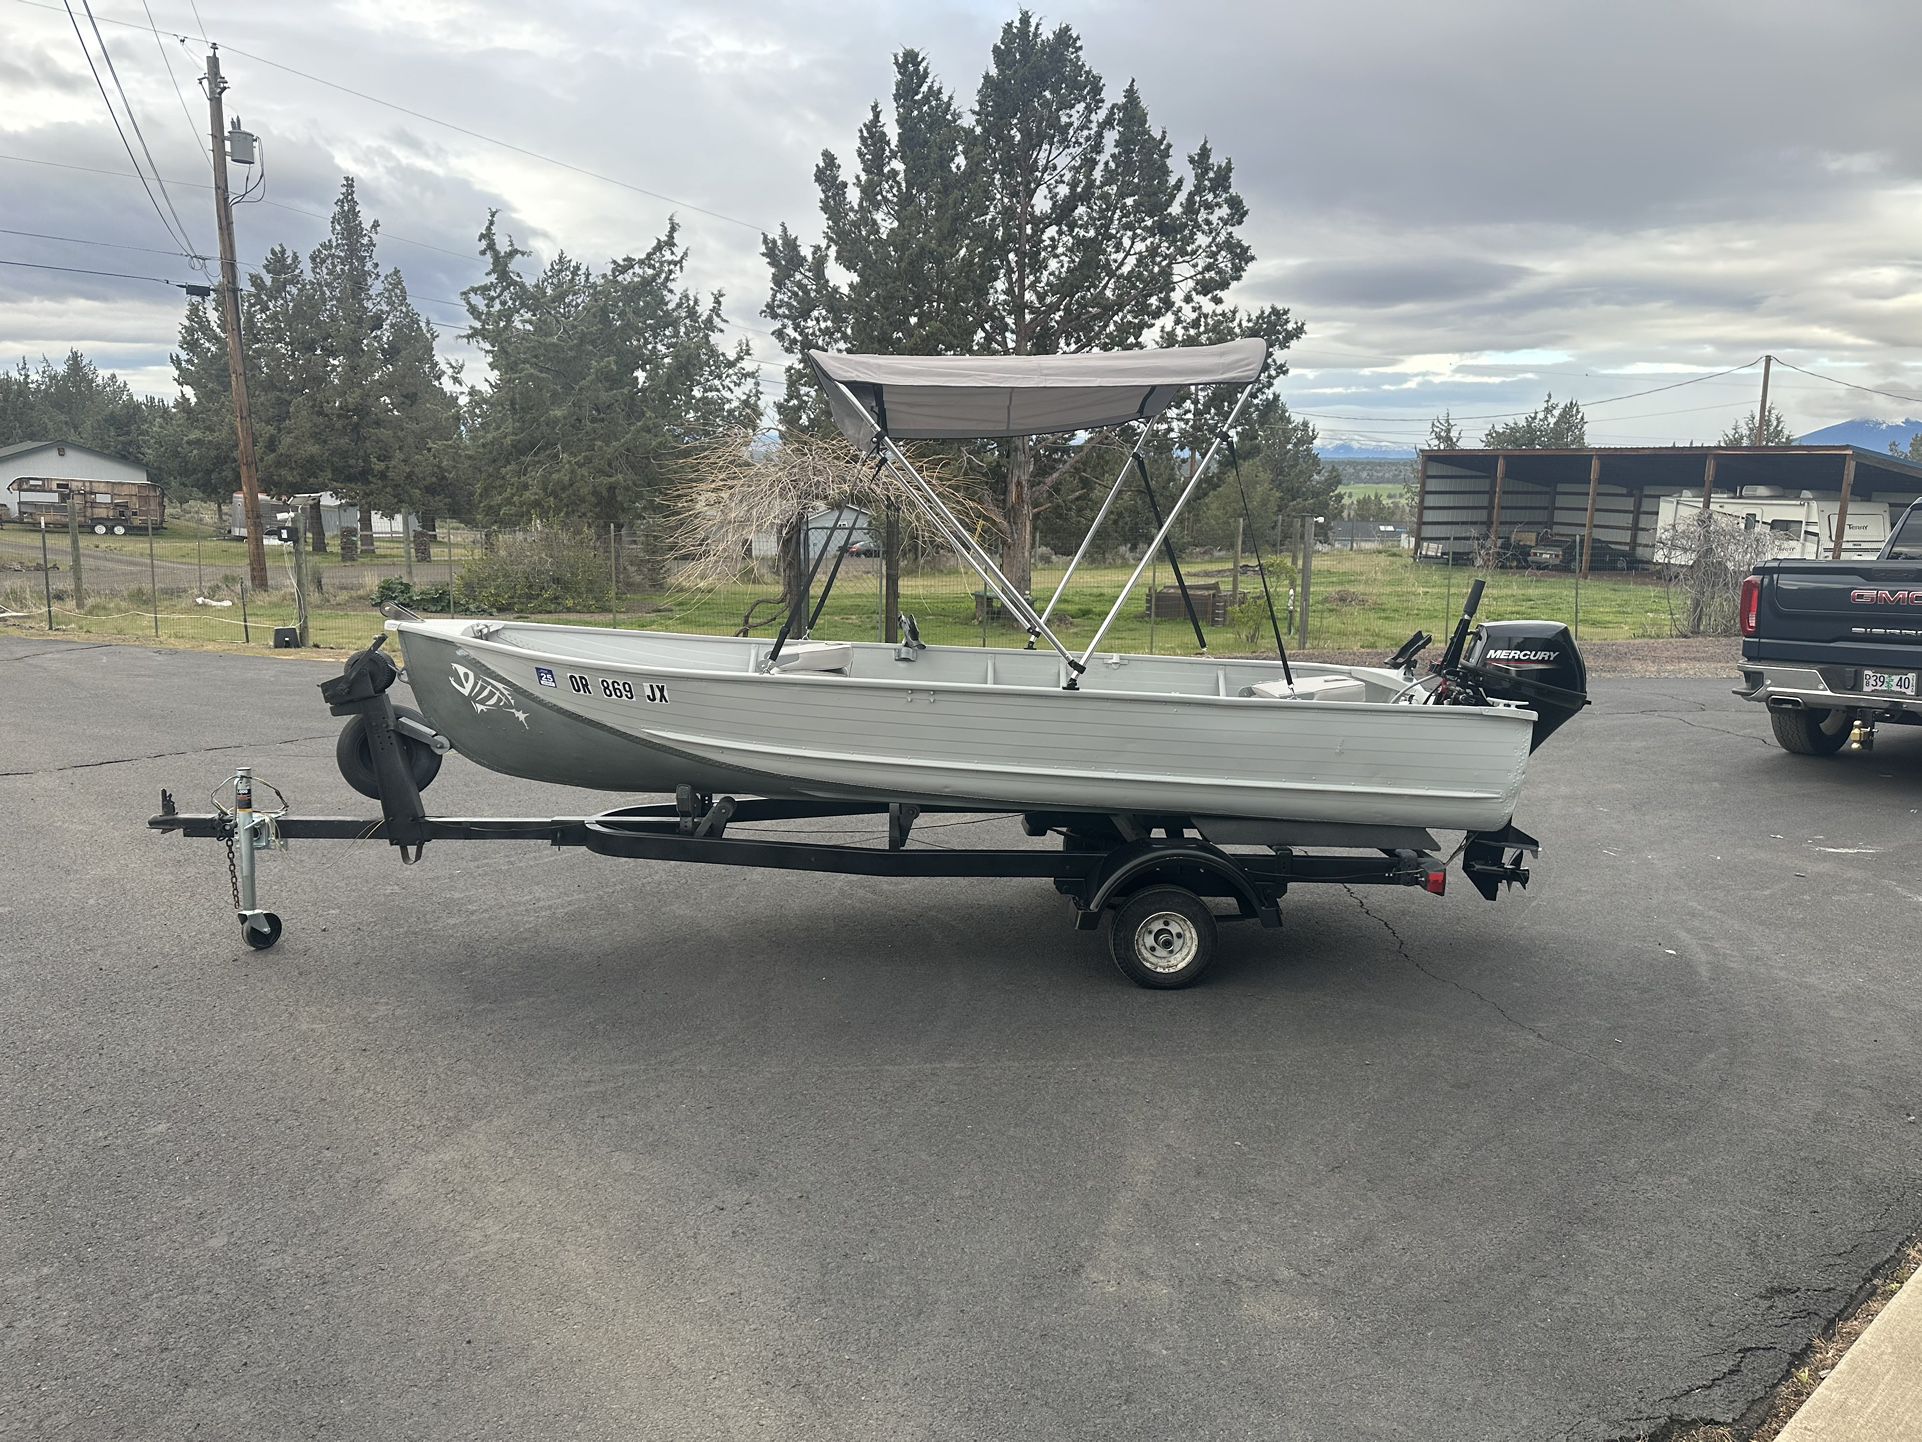 14’ Aluminum Boat With New Engine 